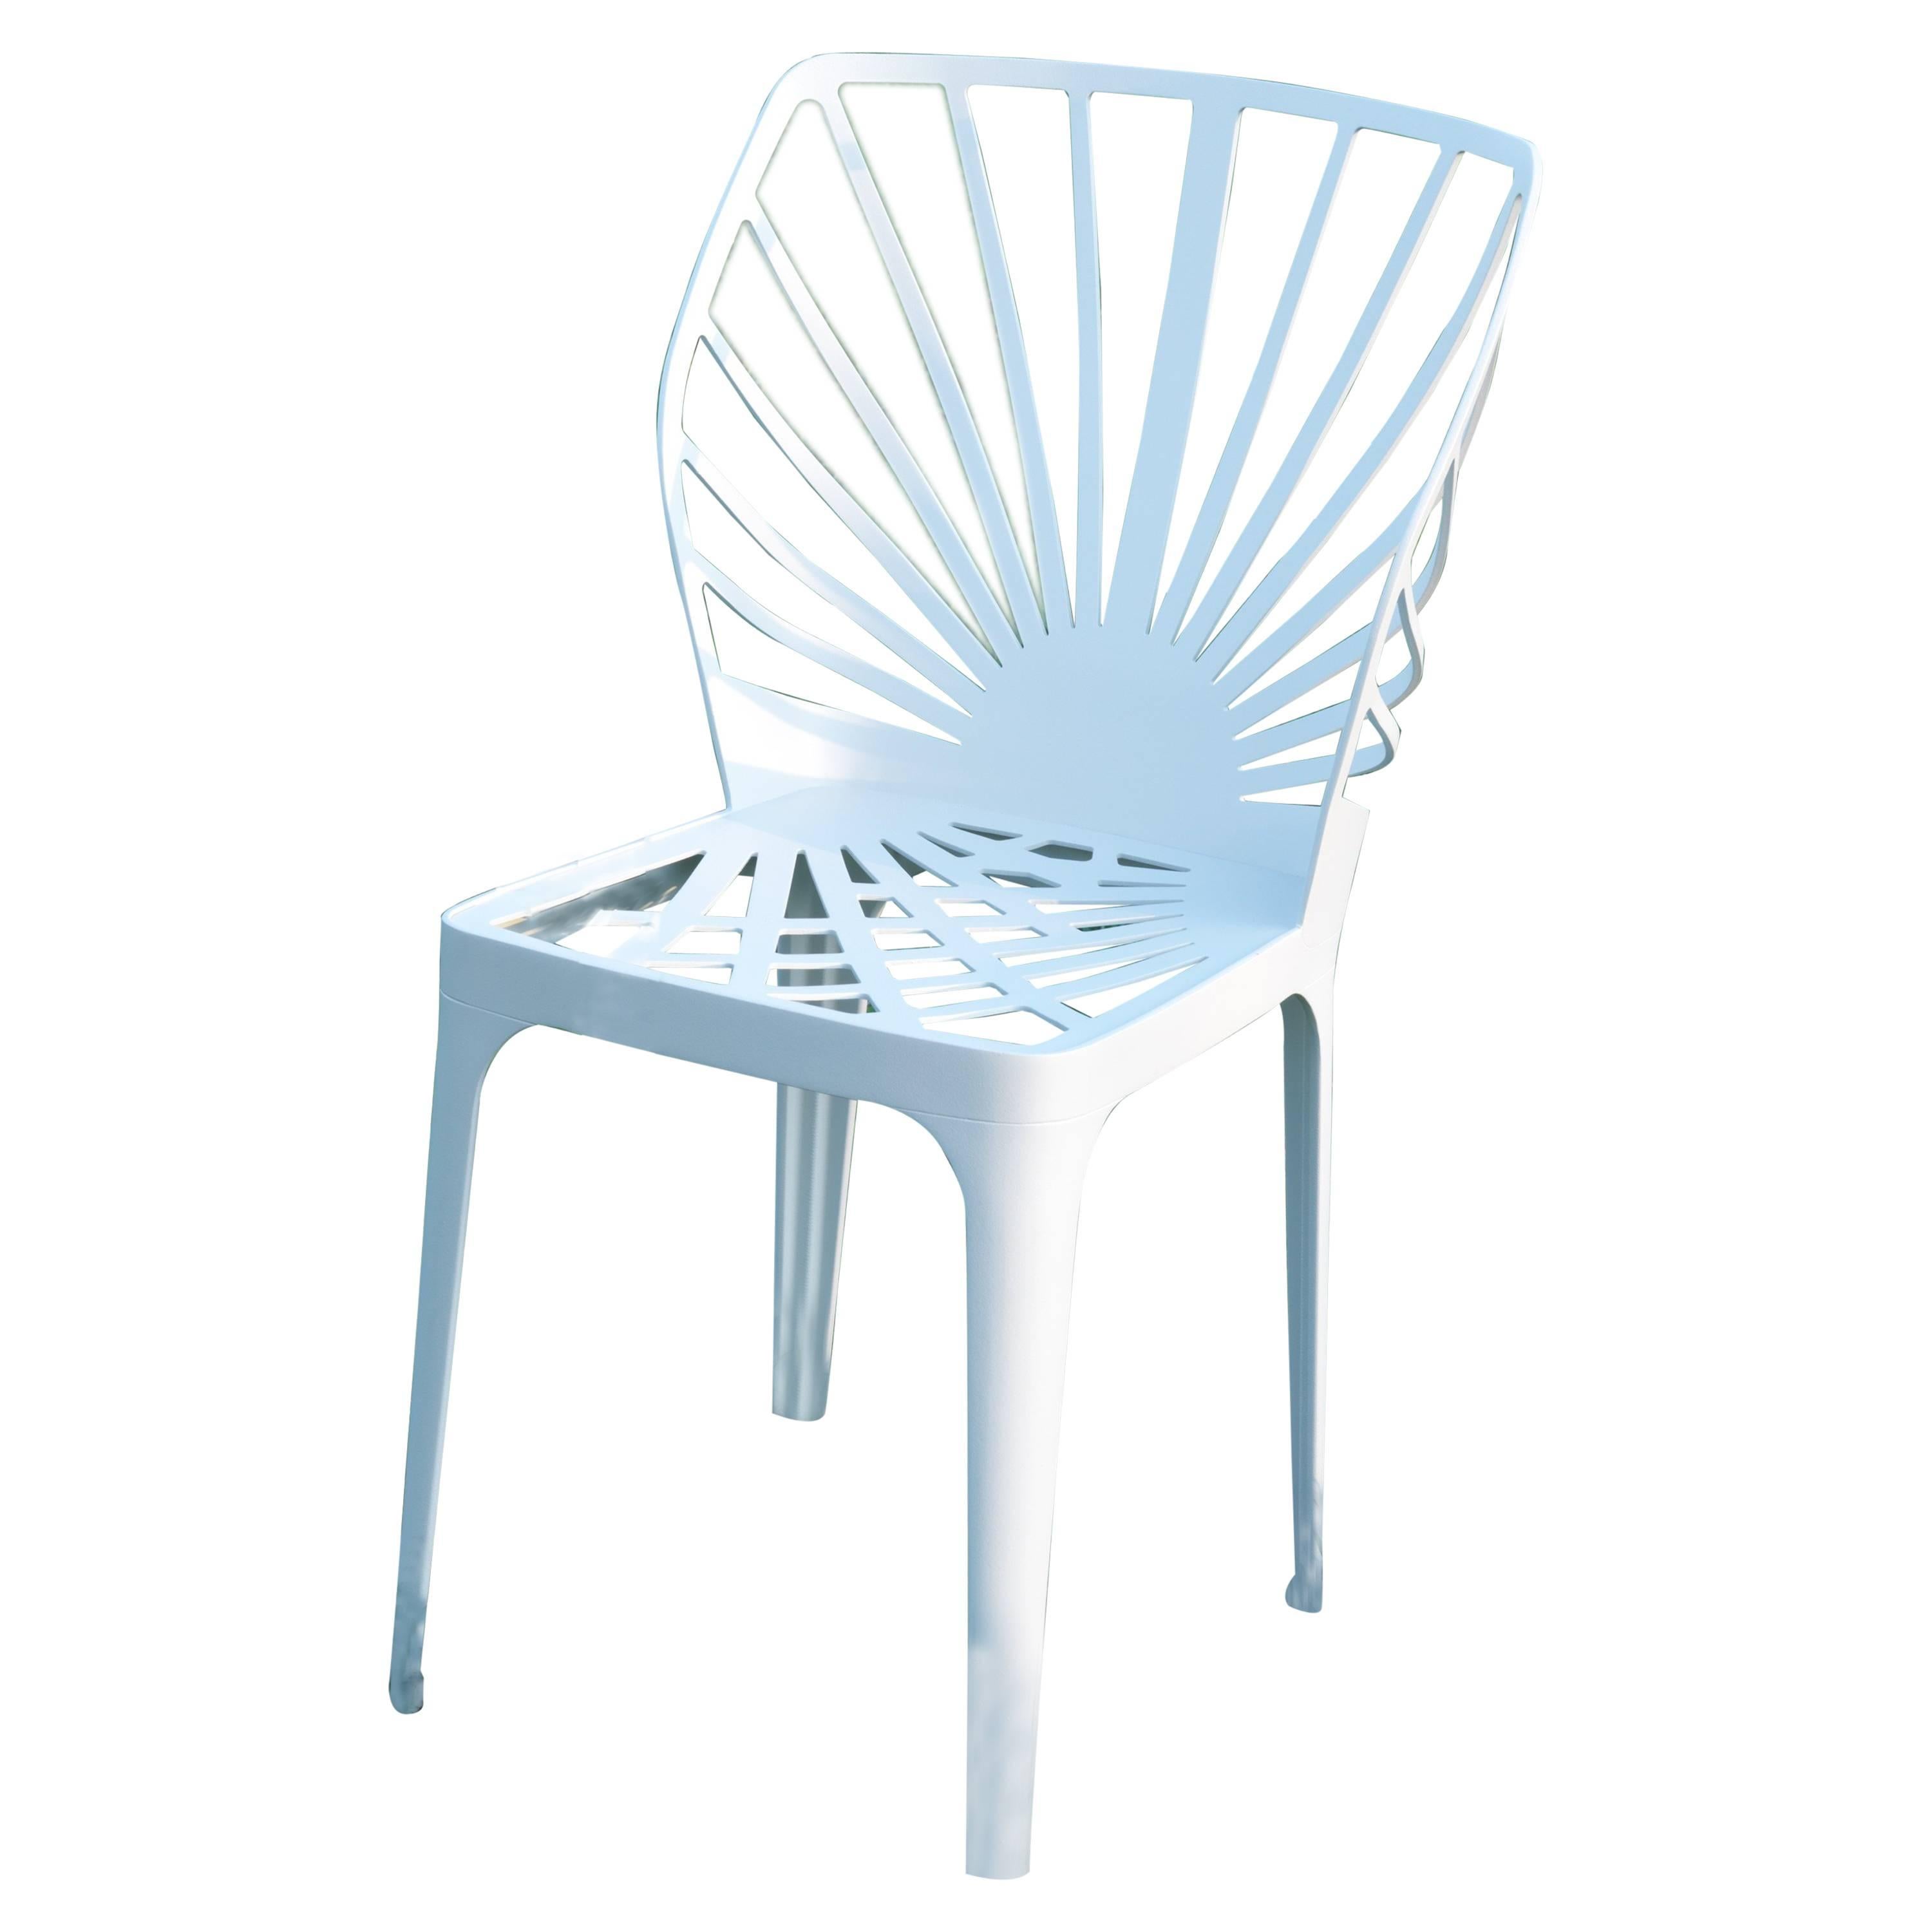 "Sunrise" White Painted Aluminum Chair Designed by L. and R. Palomba for Driade